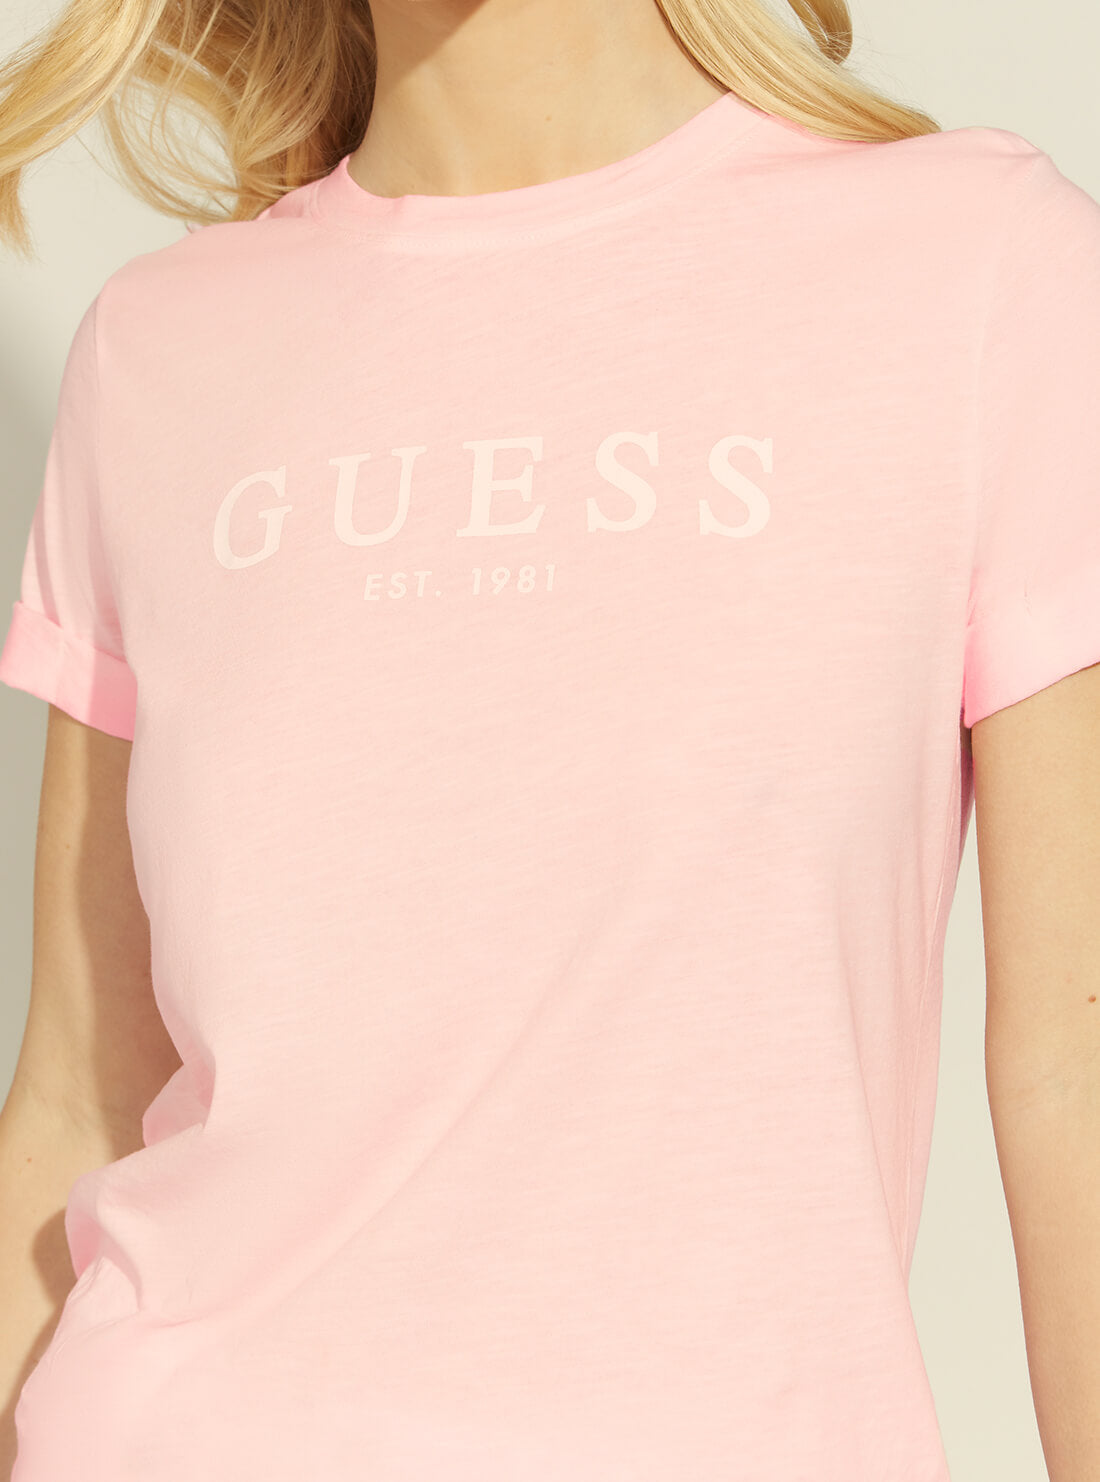 guess Eco Short Sleeve GUESS 1981 Rolled Cuff Pink Womens T-Shirt detail view